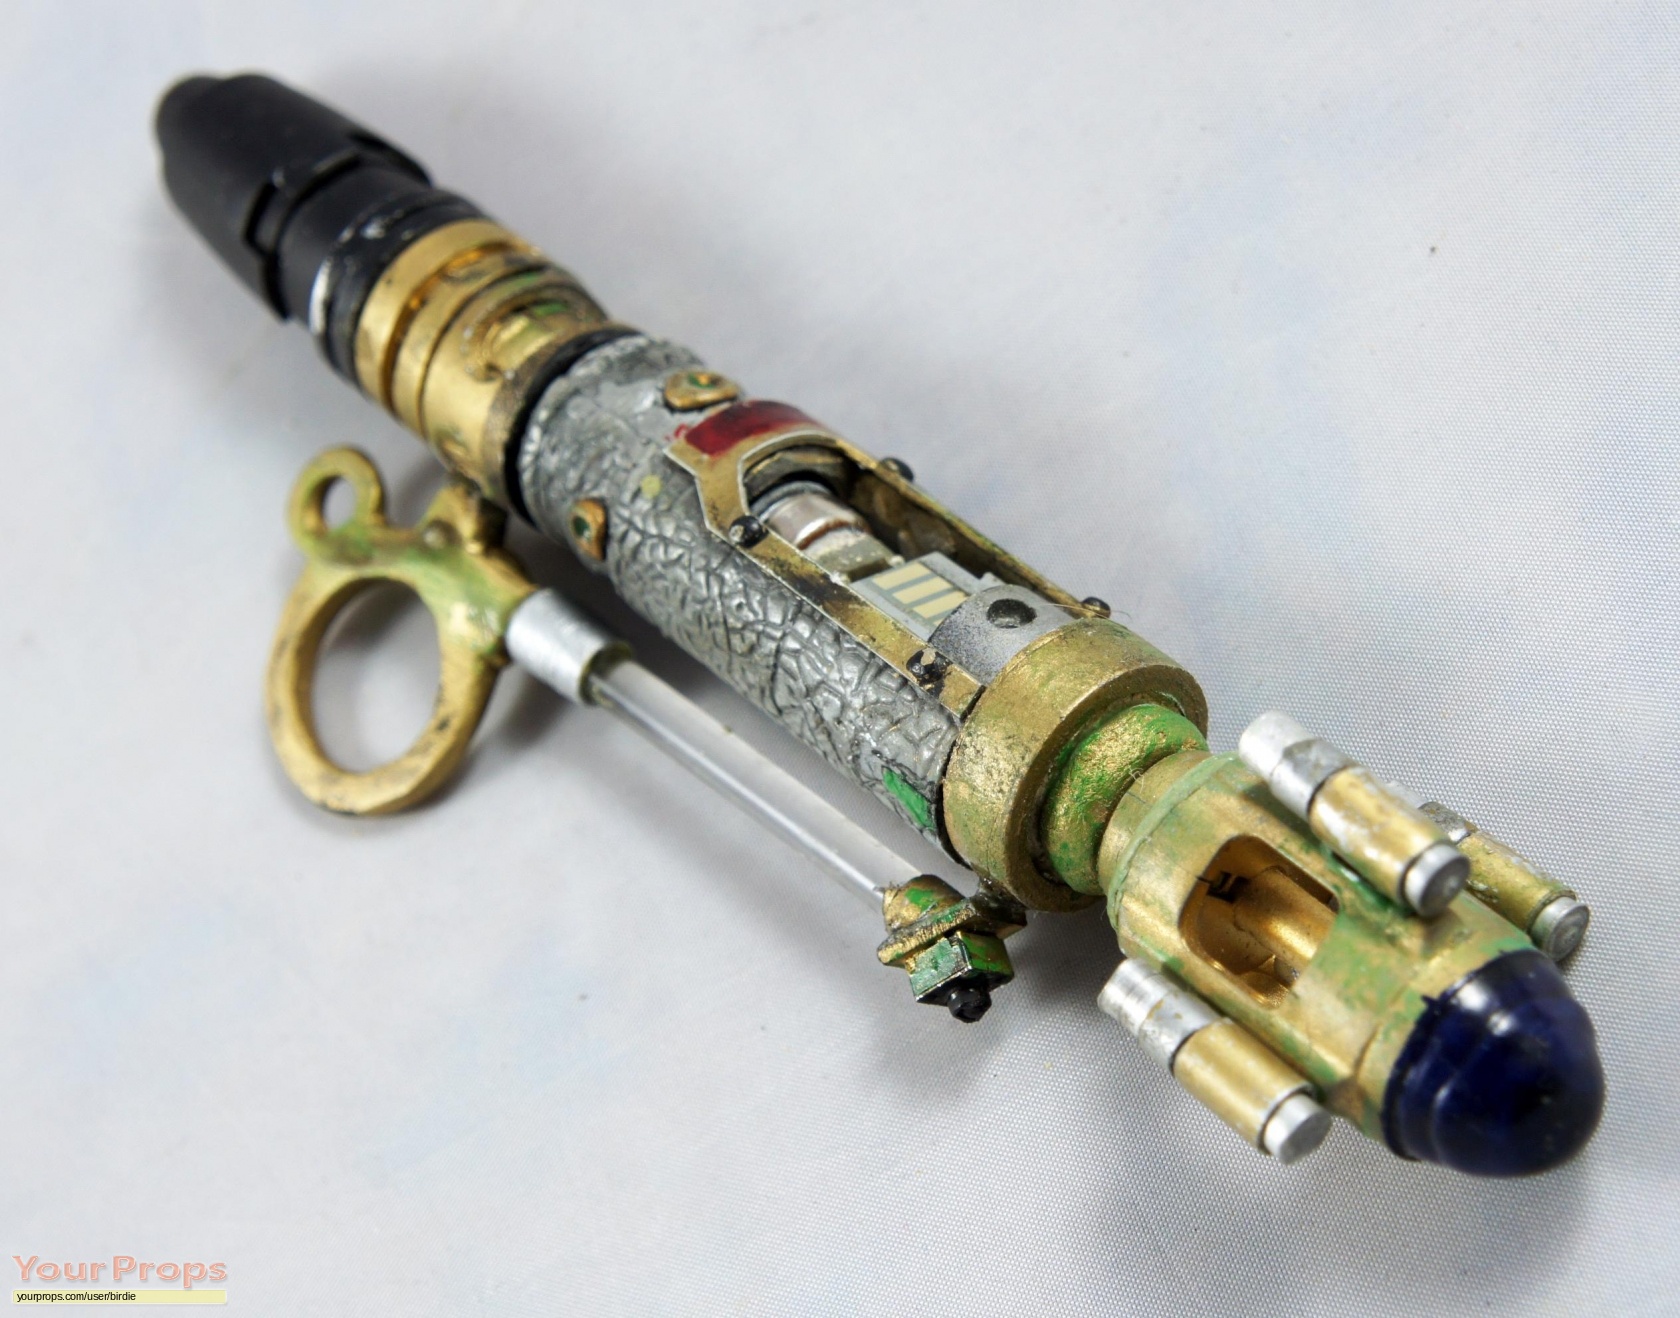 Scratch build of the future sonic screwdriver owned by River Song in Silenc...